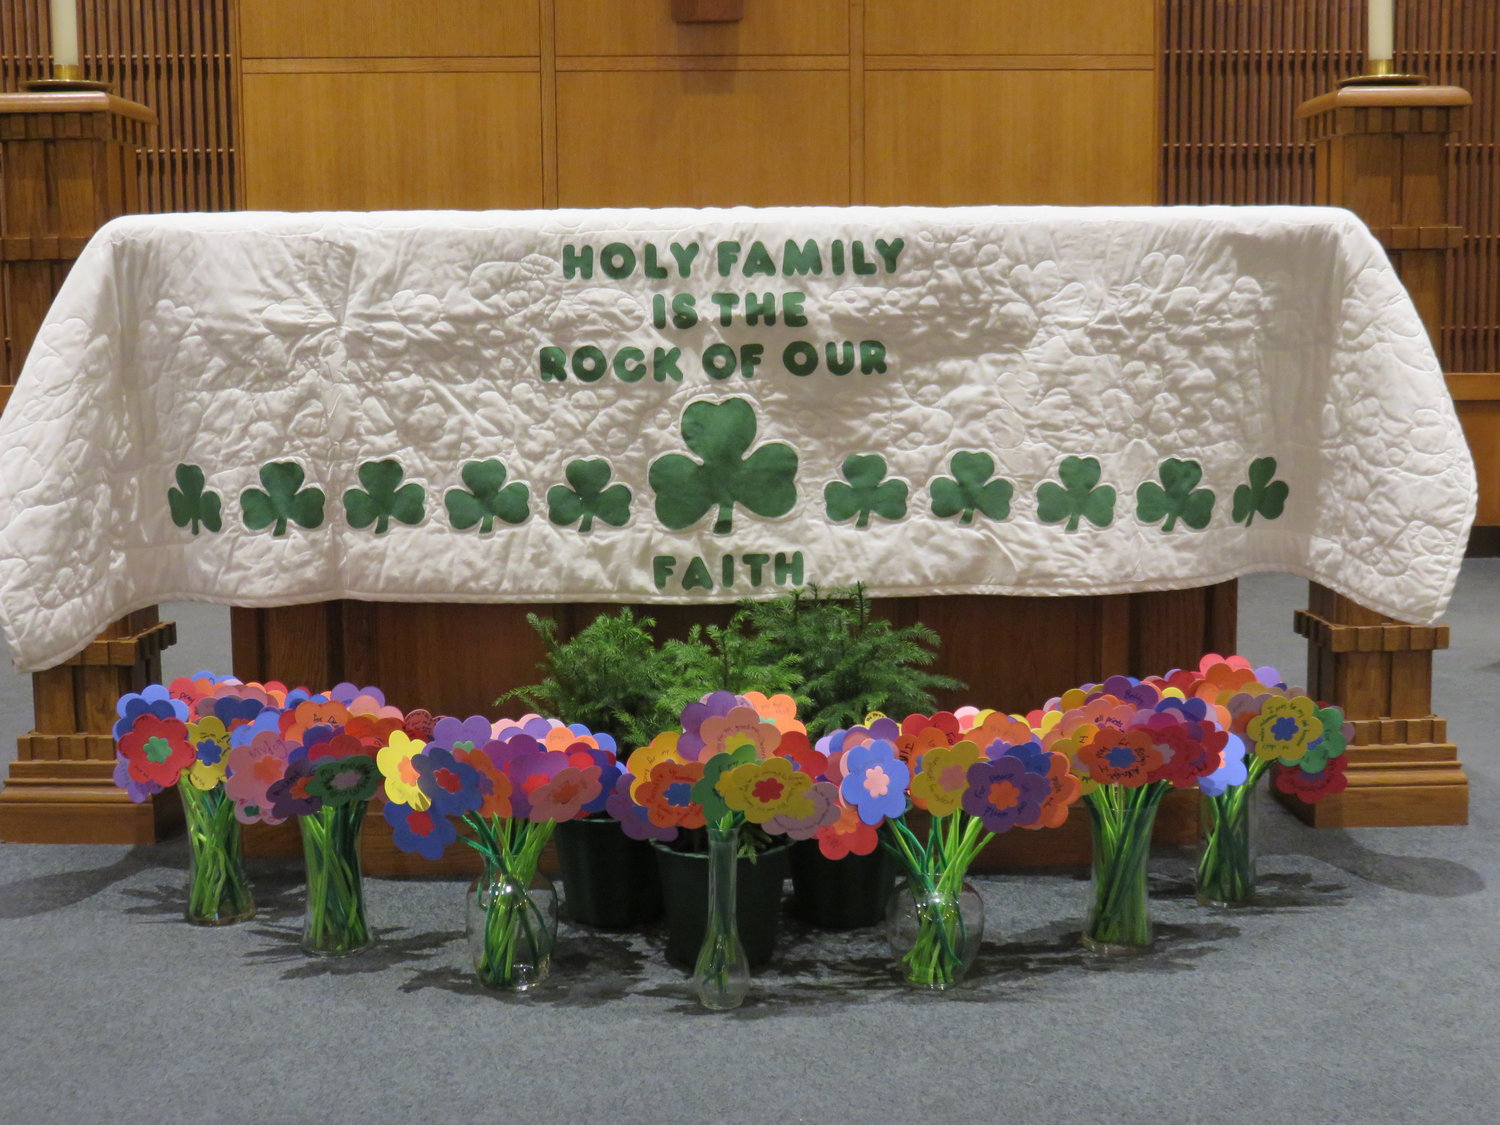 Prayer bouquets made of students' prayers written on colored paper adorn the sanctuary of Holy Family Church during a Catholic Schools Week celebration of prayer.